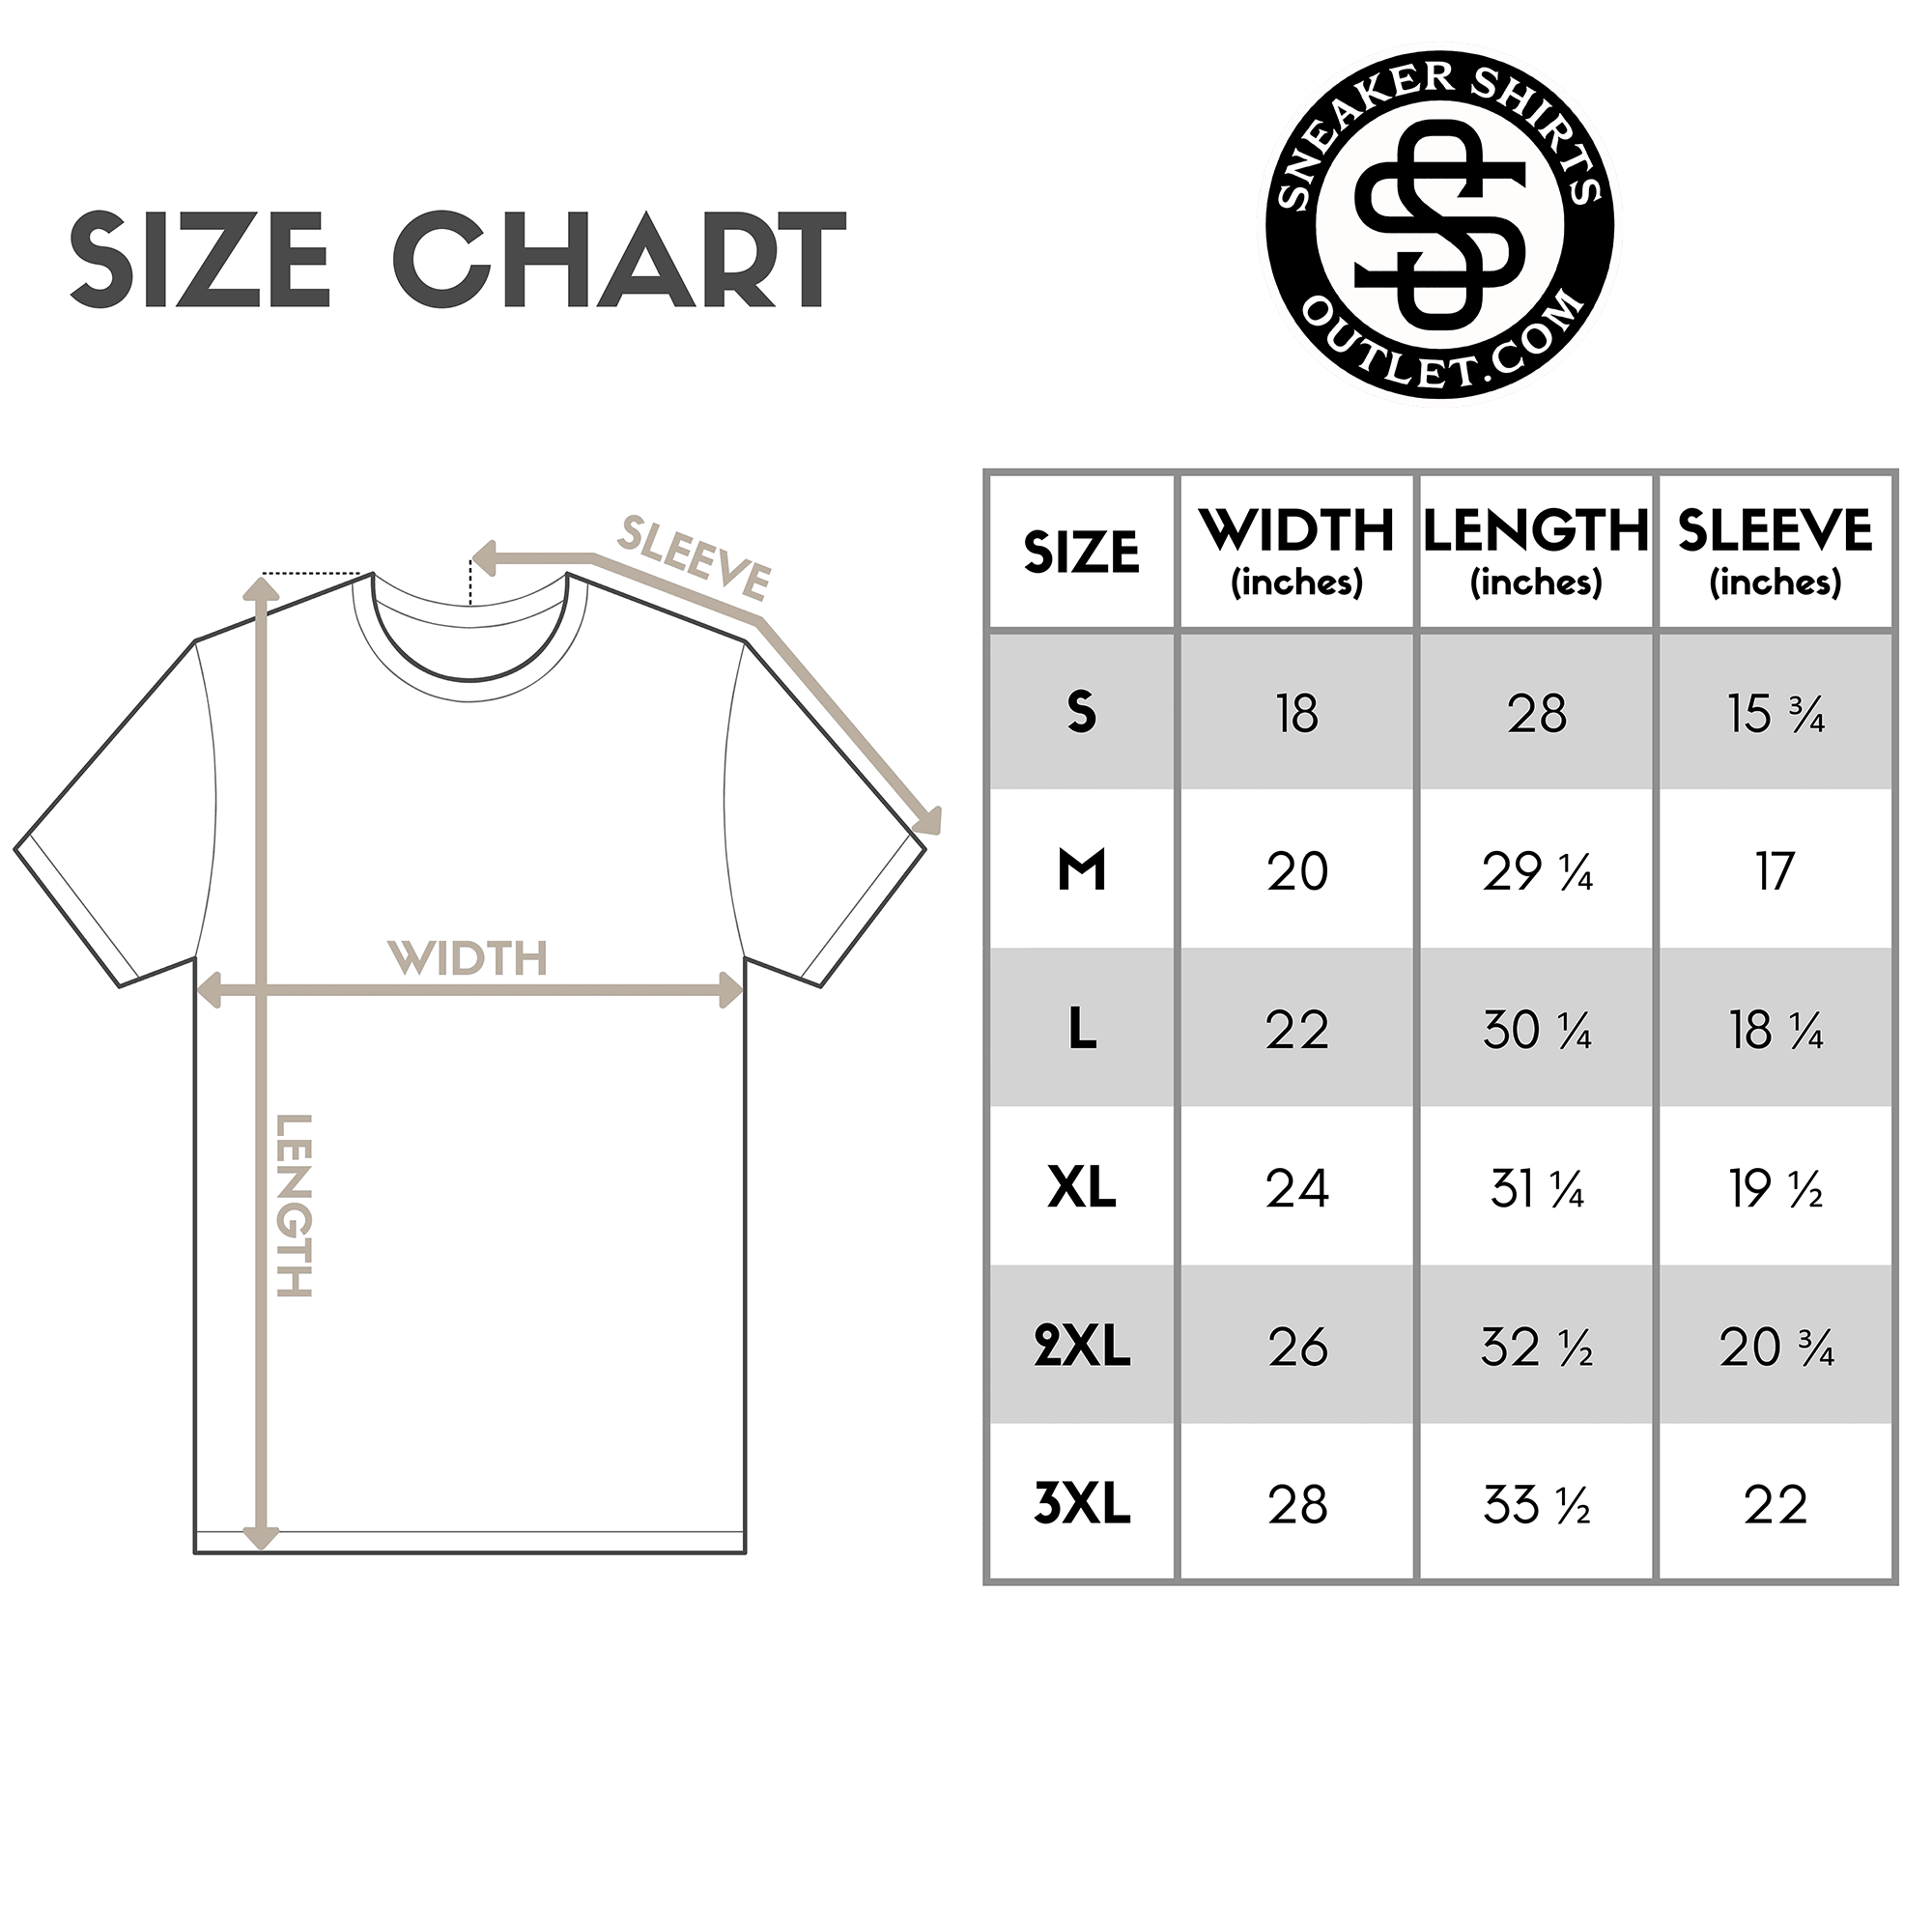 Paid in Full Shirt size chart photo